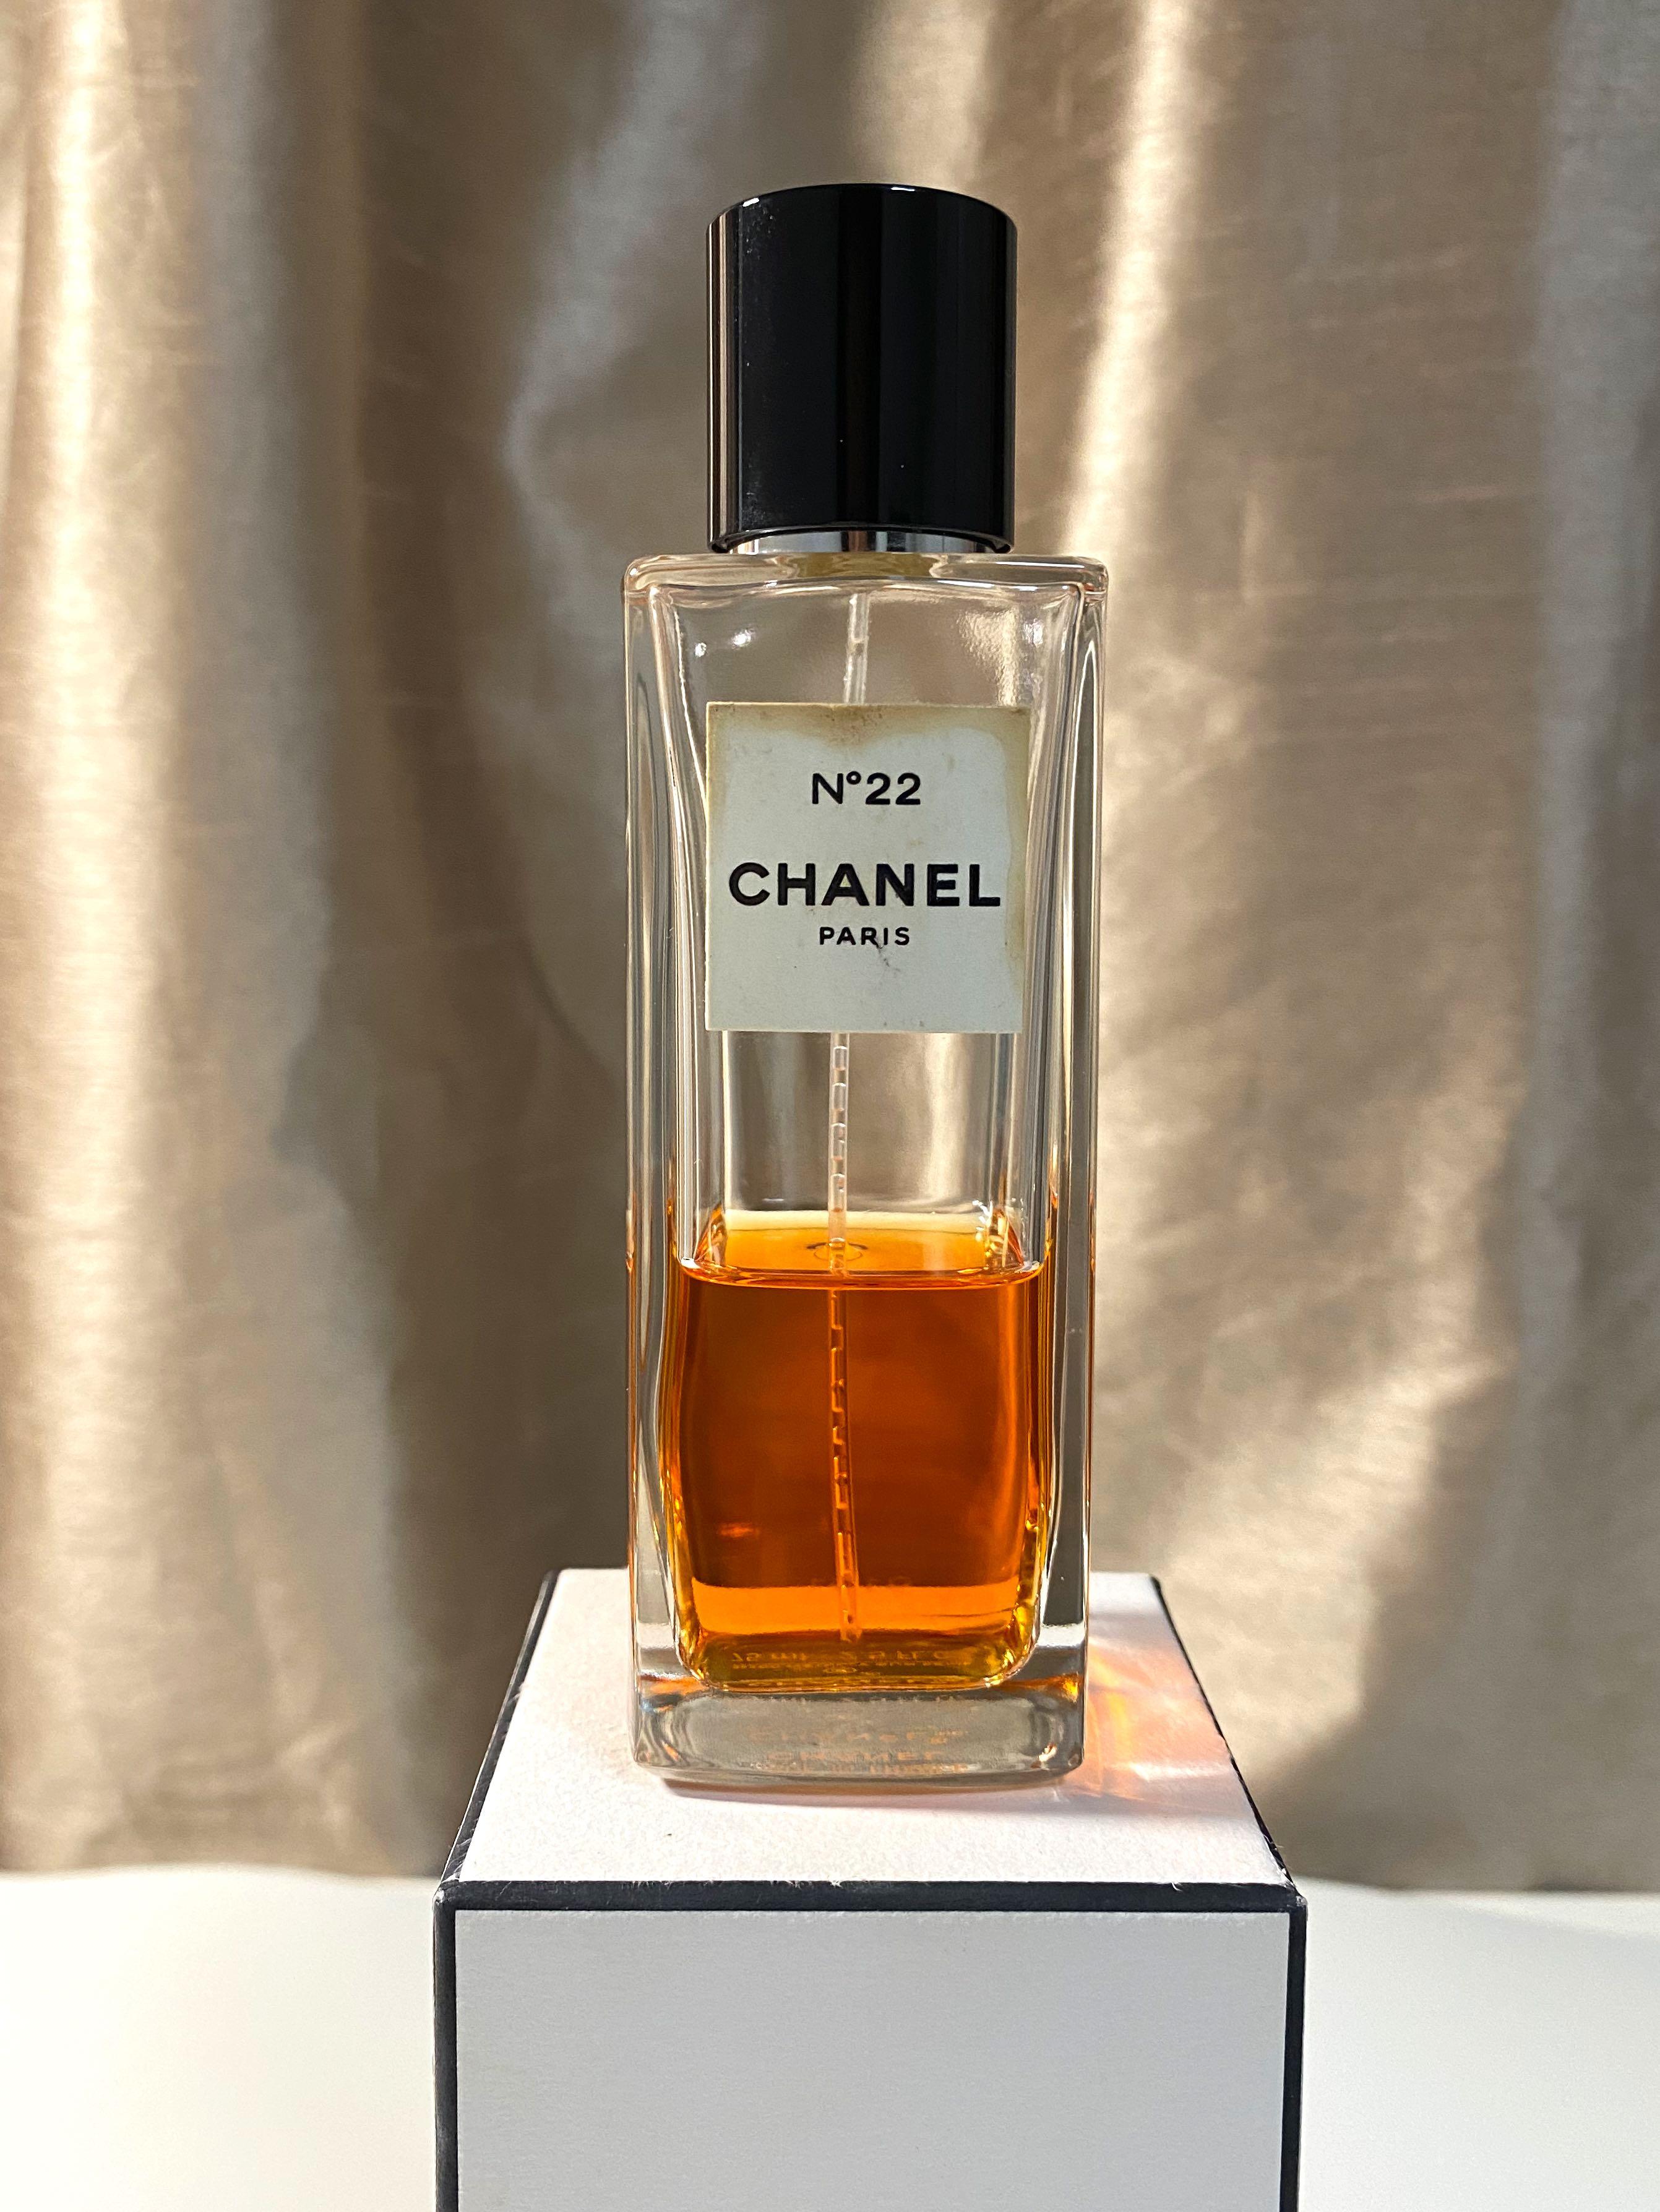 Chanel pioneers eco-conscious beauty with the launch of their N°1